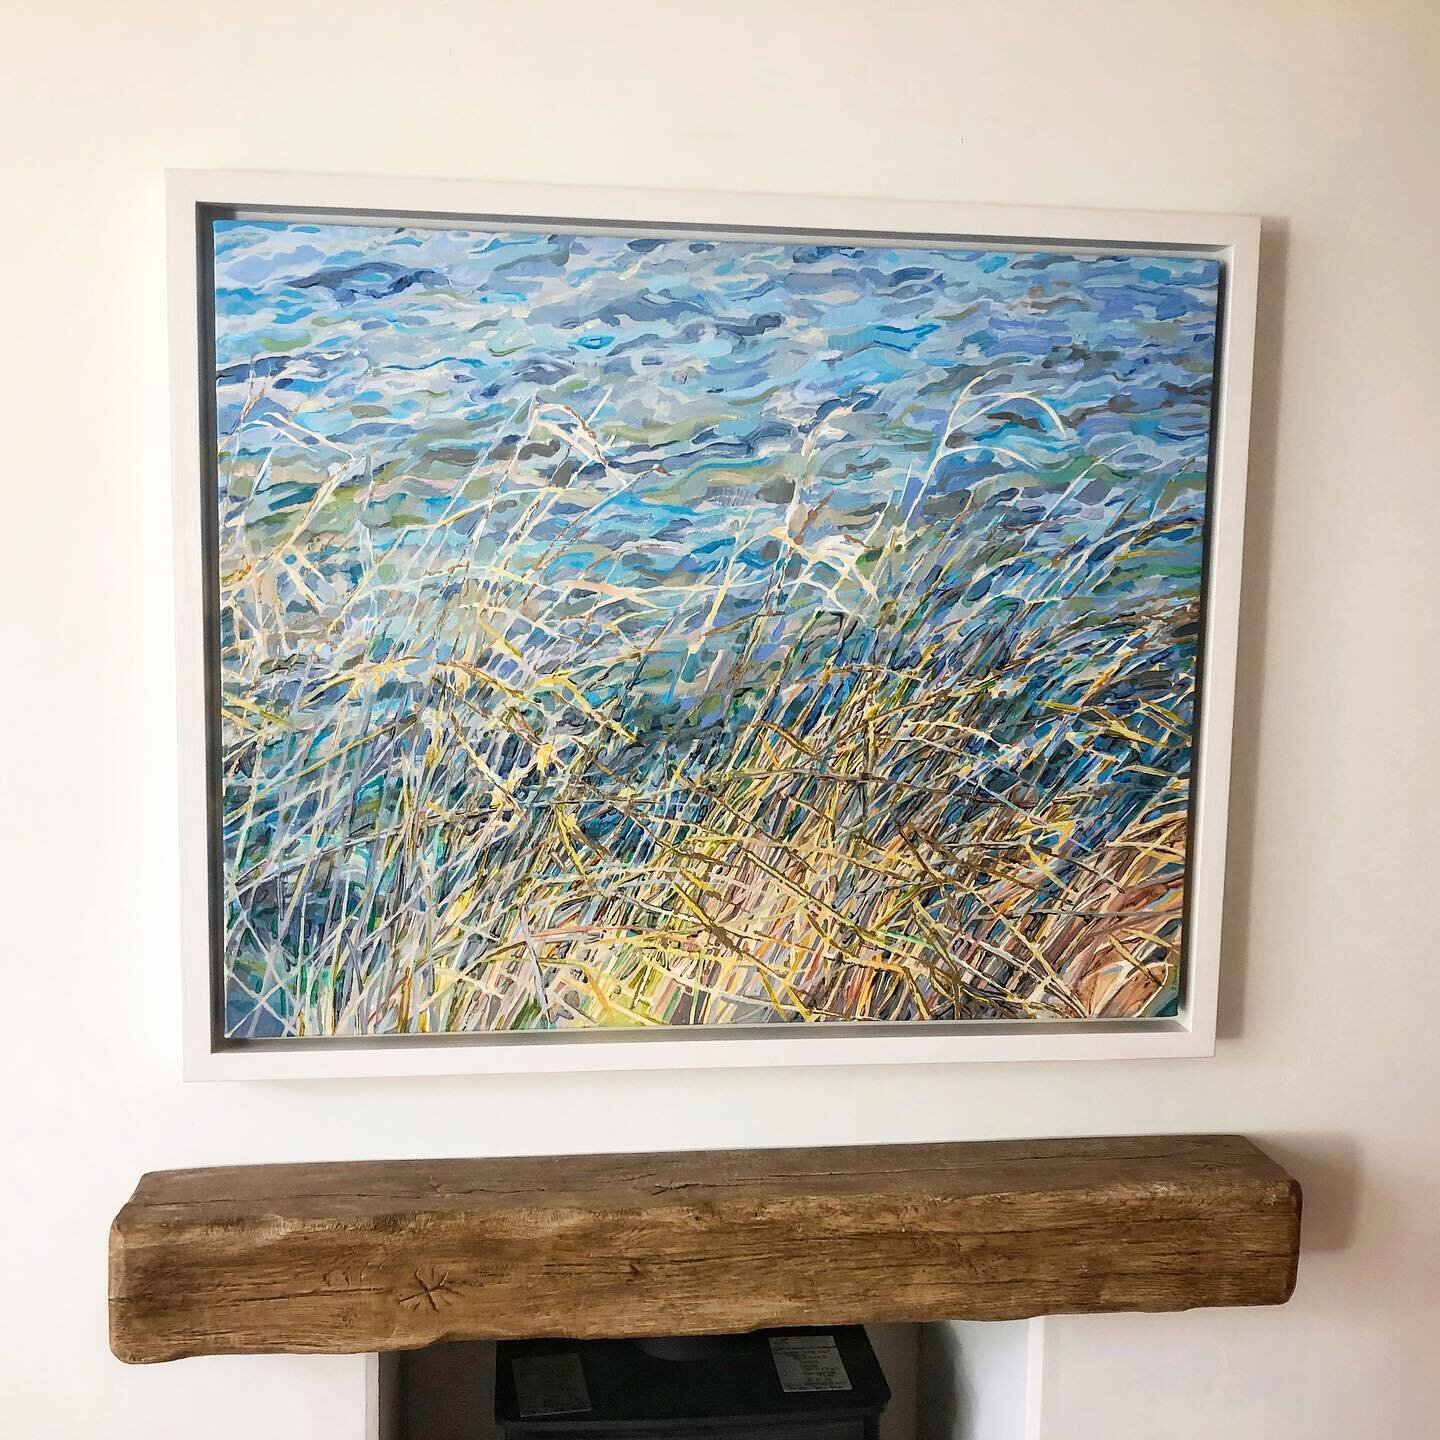 Absolutely love seeing where my pictures end up! This was painted from photos I took while walking around the grounds at Castle Howard. The breeze across the open expanse down from the house across the pond set the reeds dancing. It&rsquo;s hard to s